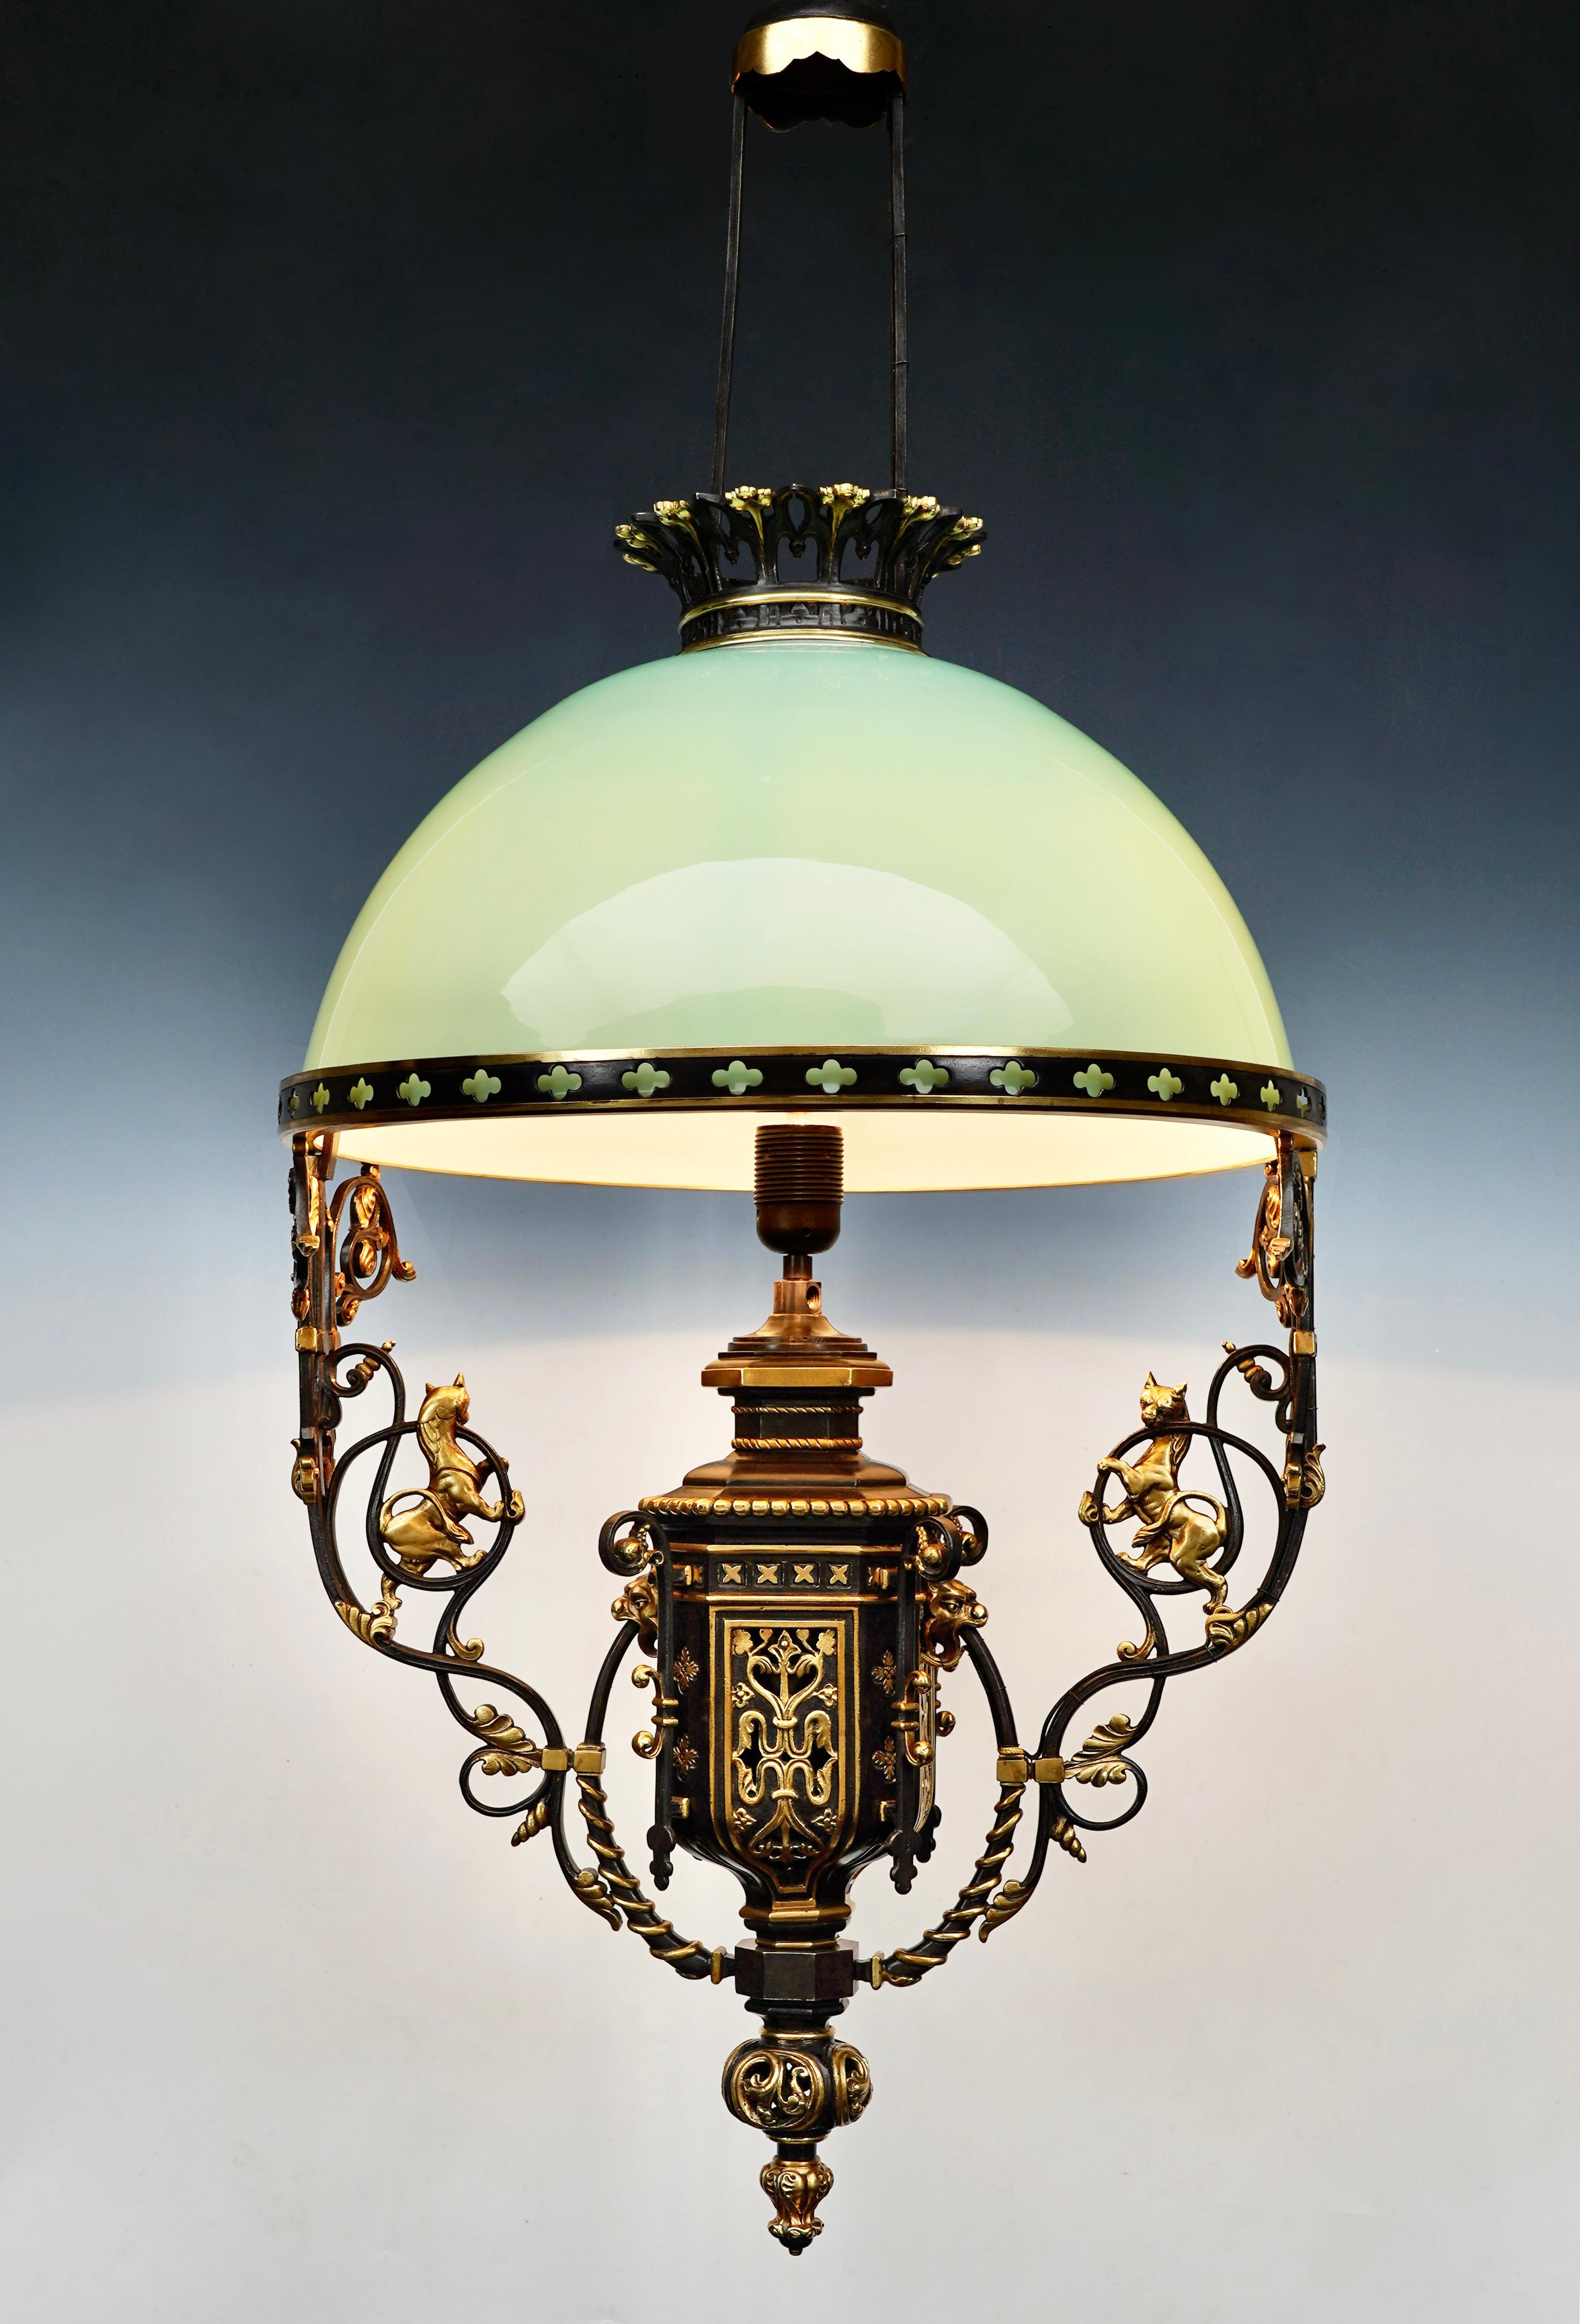 Beautiful neo-gothic chandelier in patinated bronze with gold highlights and water green opaline glass. The central shaft, decorated with cartridges in imitation of coats of arms, is decorated with gargoyle heads from which two branches of foliage